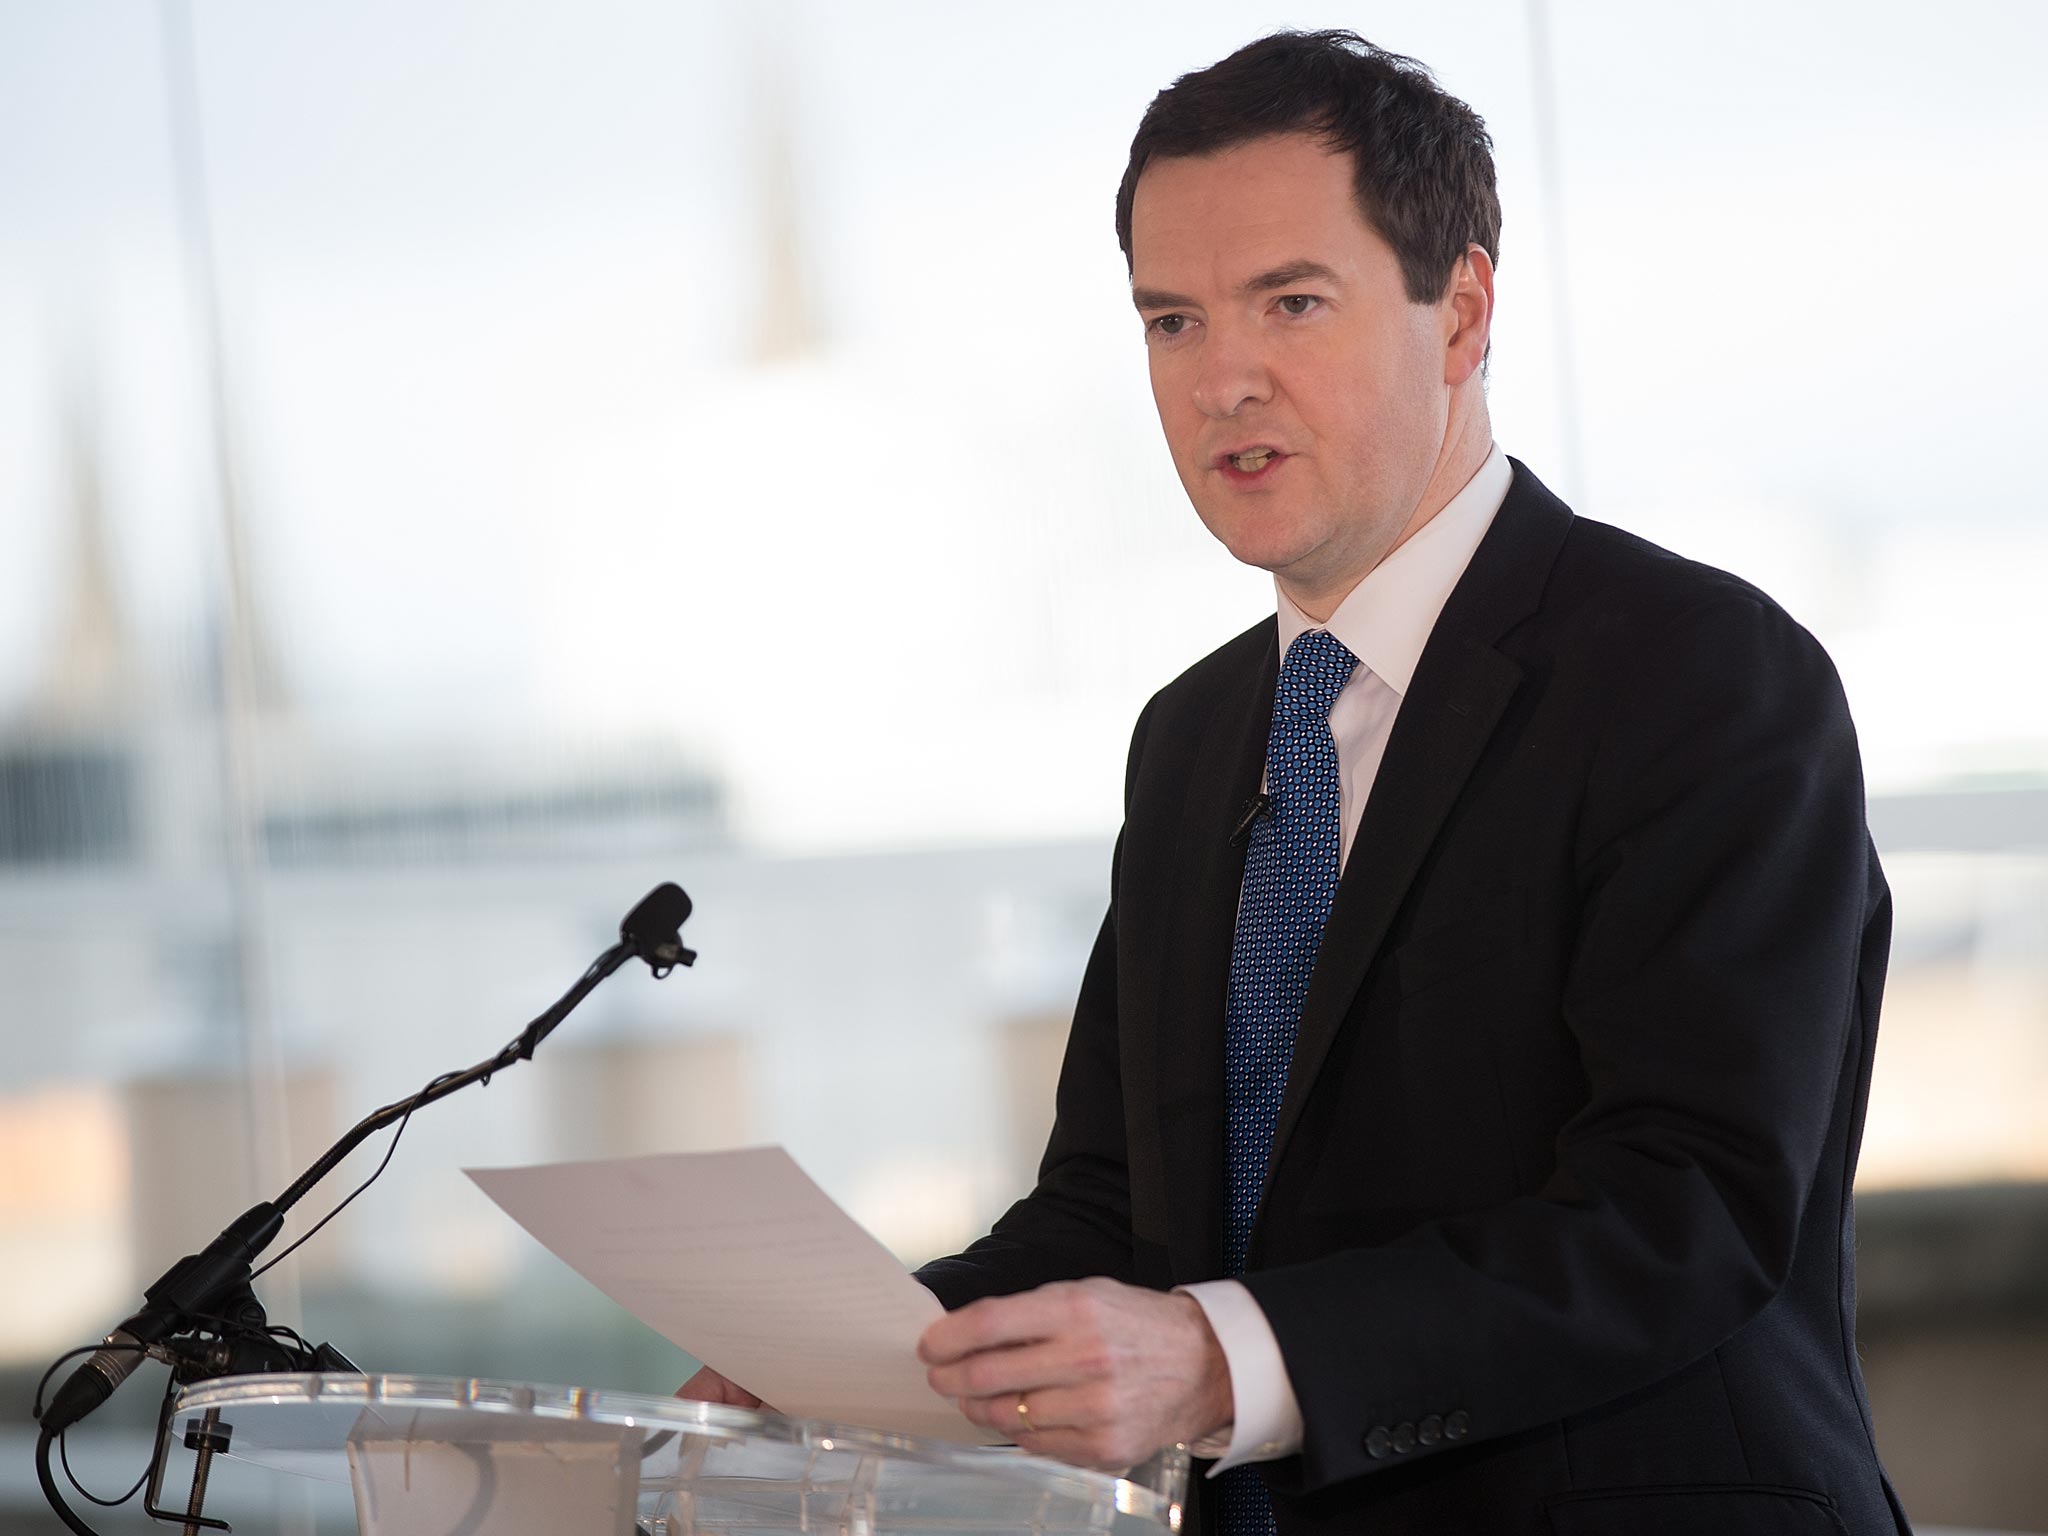 Women have been hit far harder financially than men due to George Osborne’s tax and benefit changes